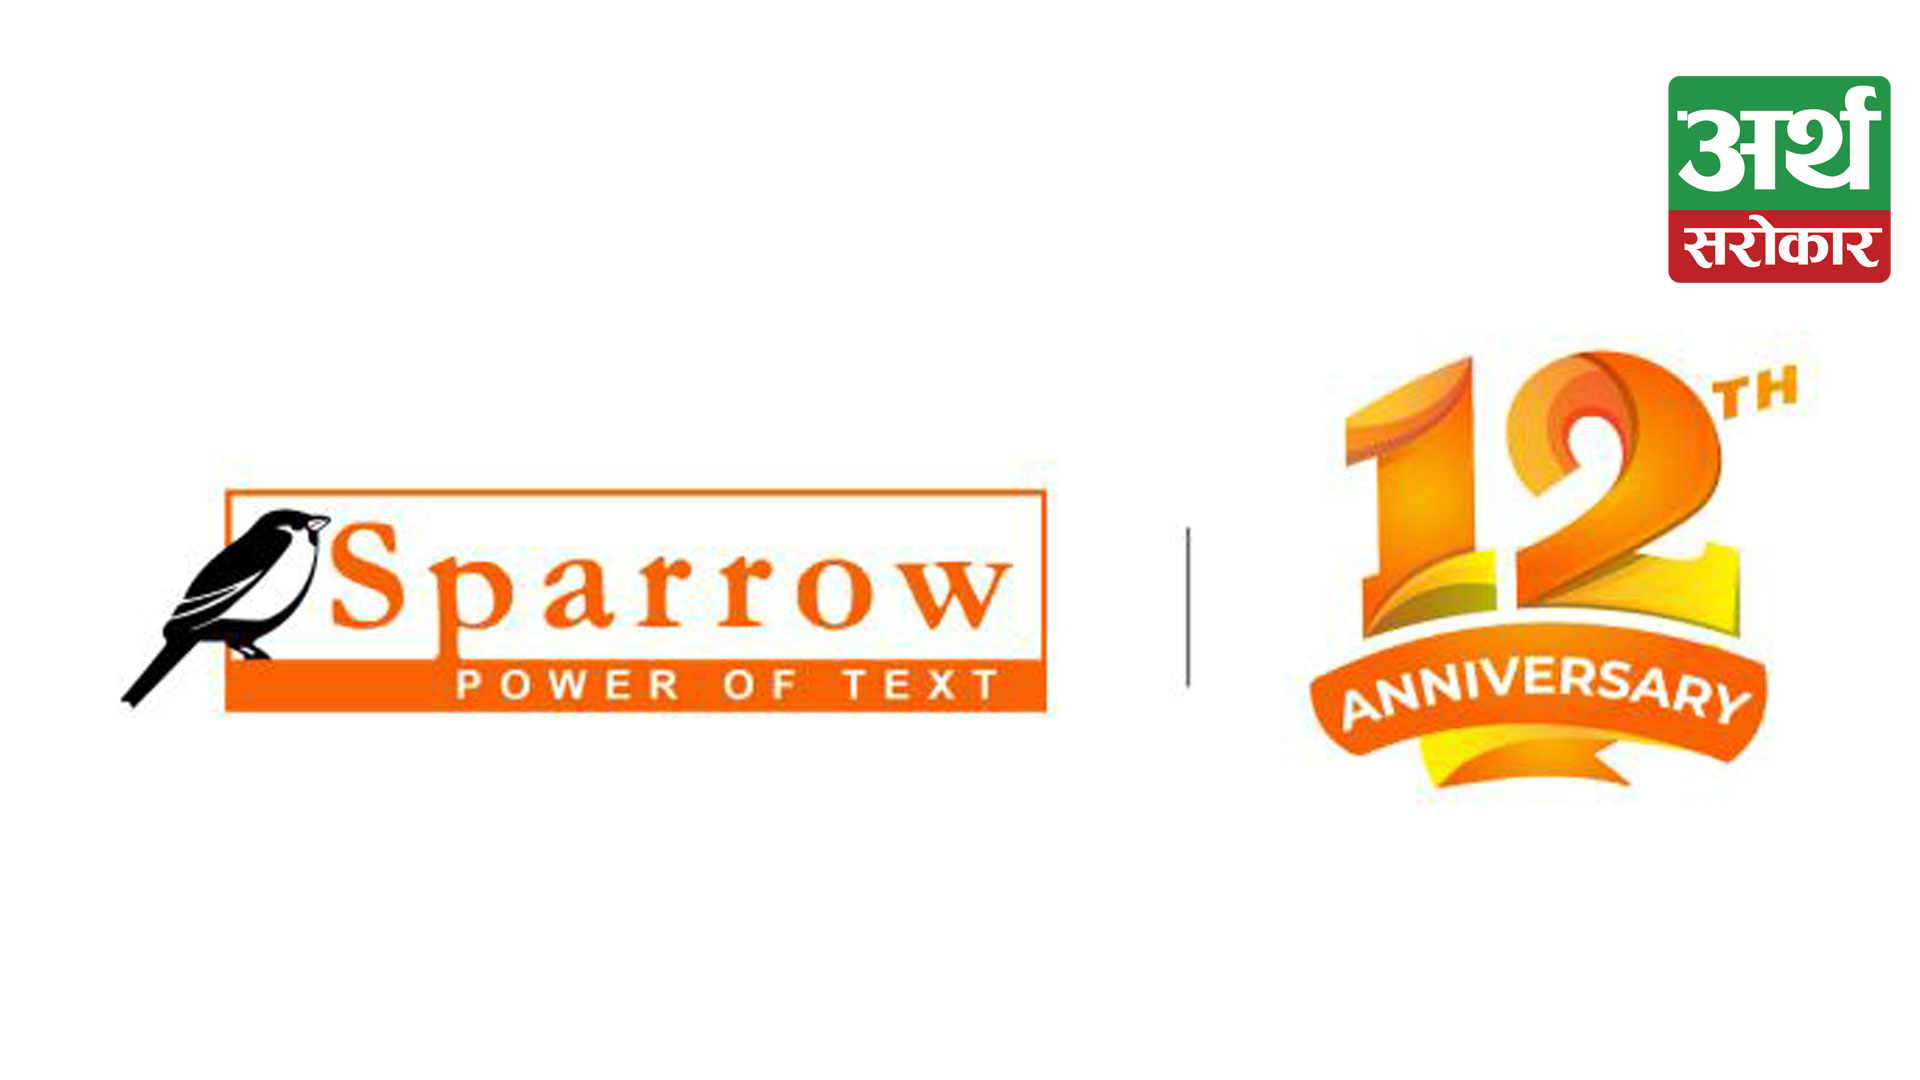 Leading SMS service provider SPARROW SMS is celebrating its 12th anniversary today